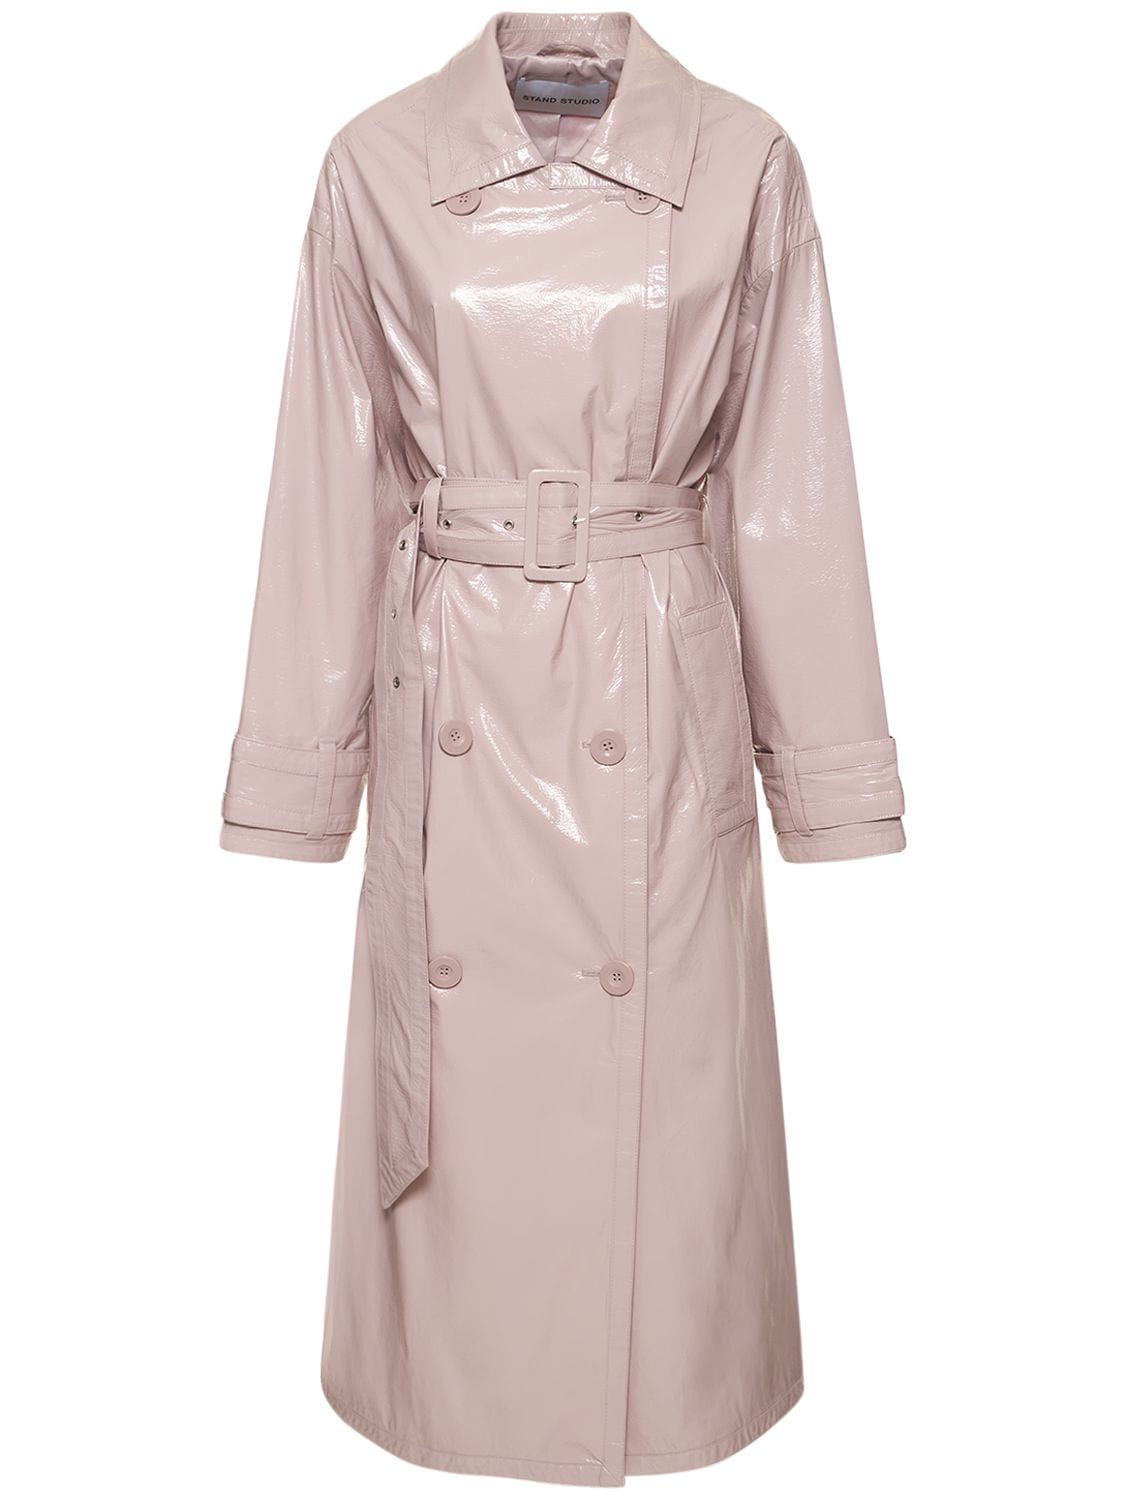 STAND STUDIO KATHARINA FAUX LEATHER TRENCH COAT